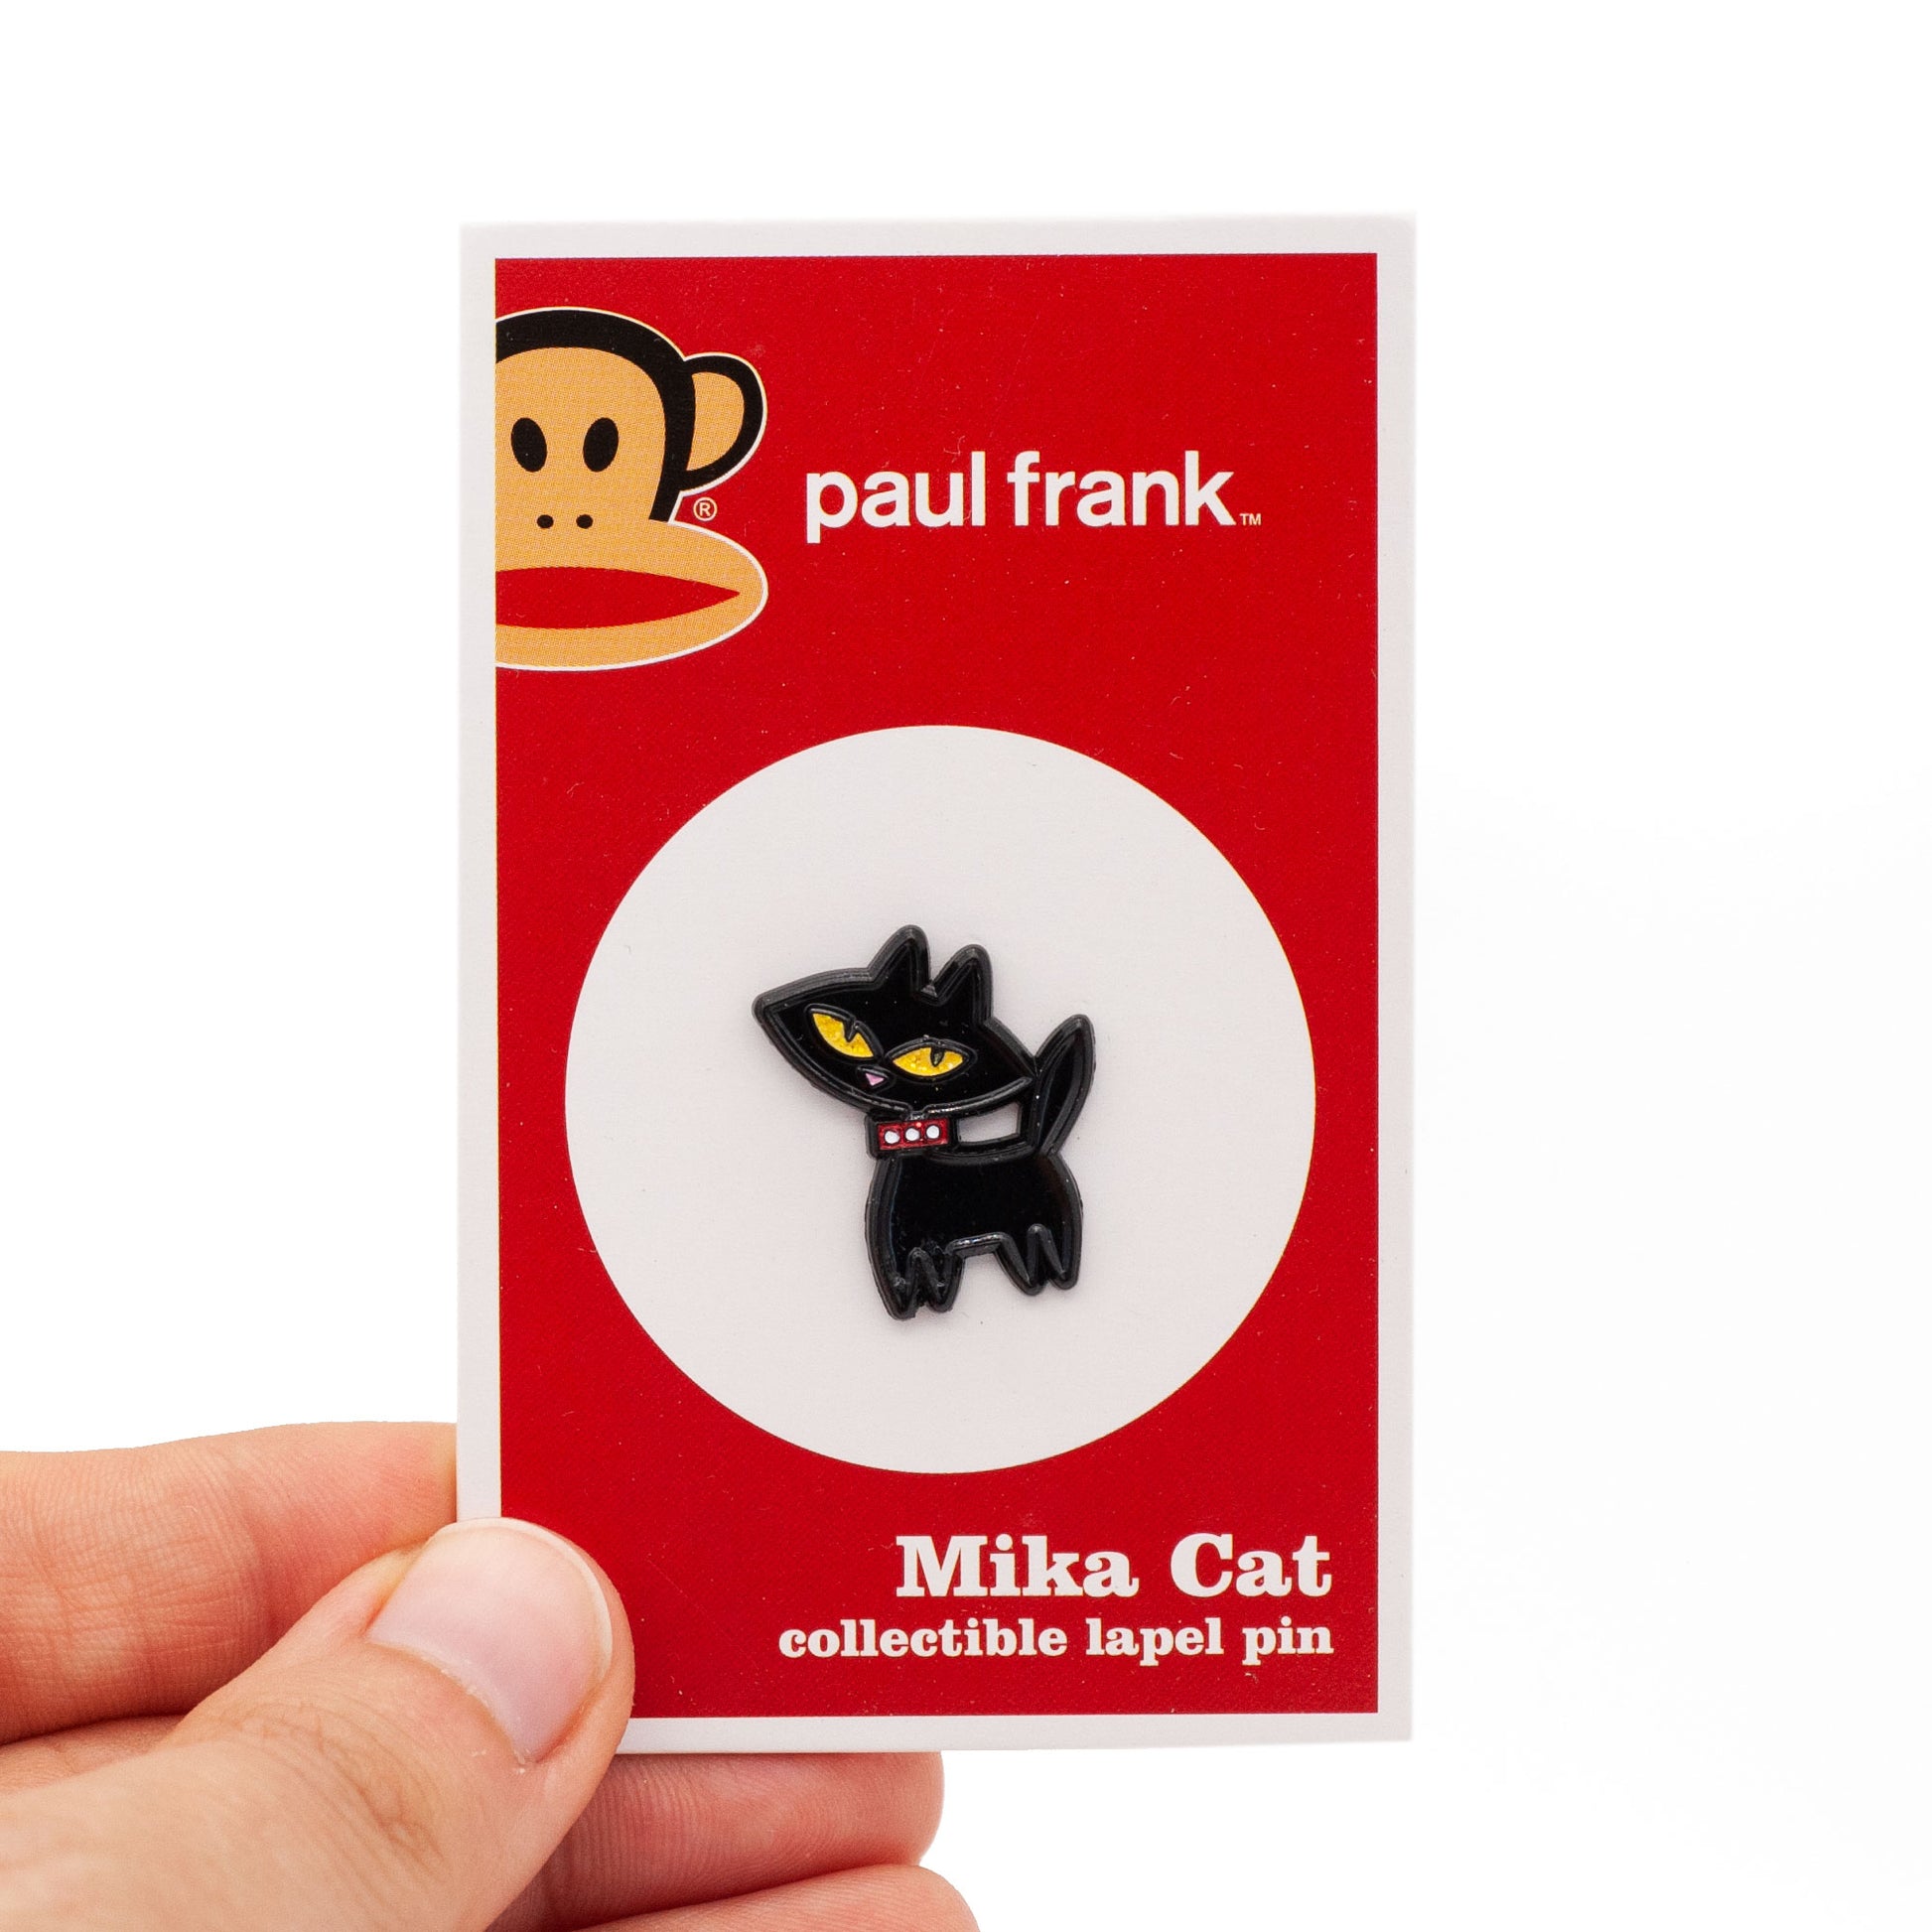 Mika Cat is a black cat enamel pin with yellow eyes and a red collar. The pin is on a backing card being held by a hand.